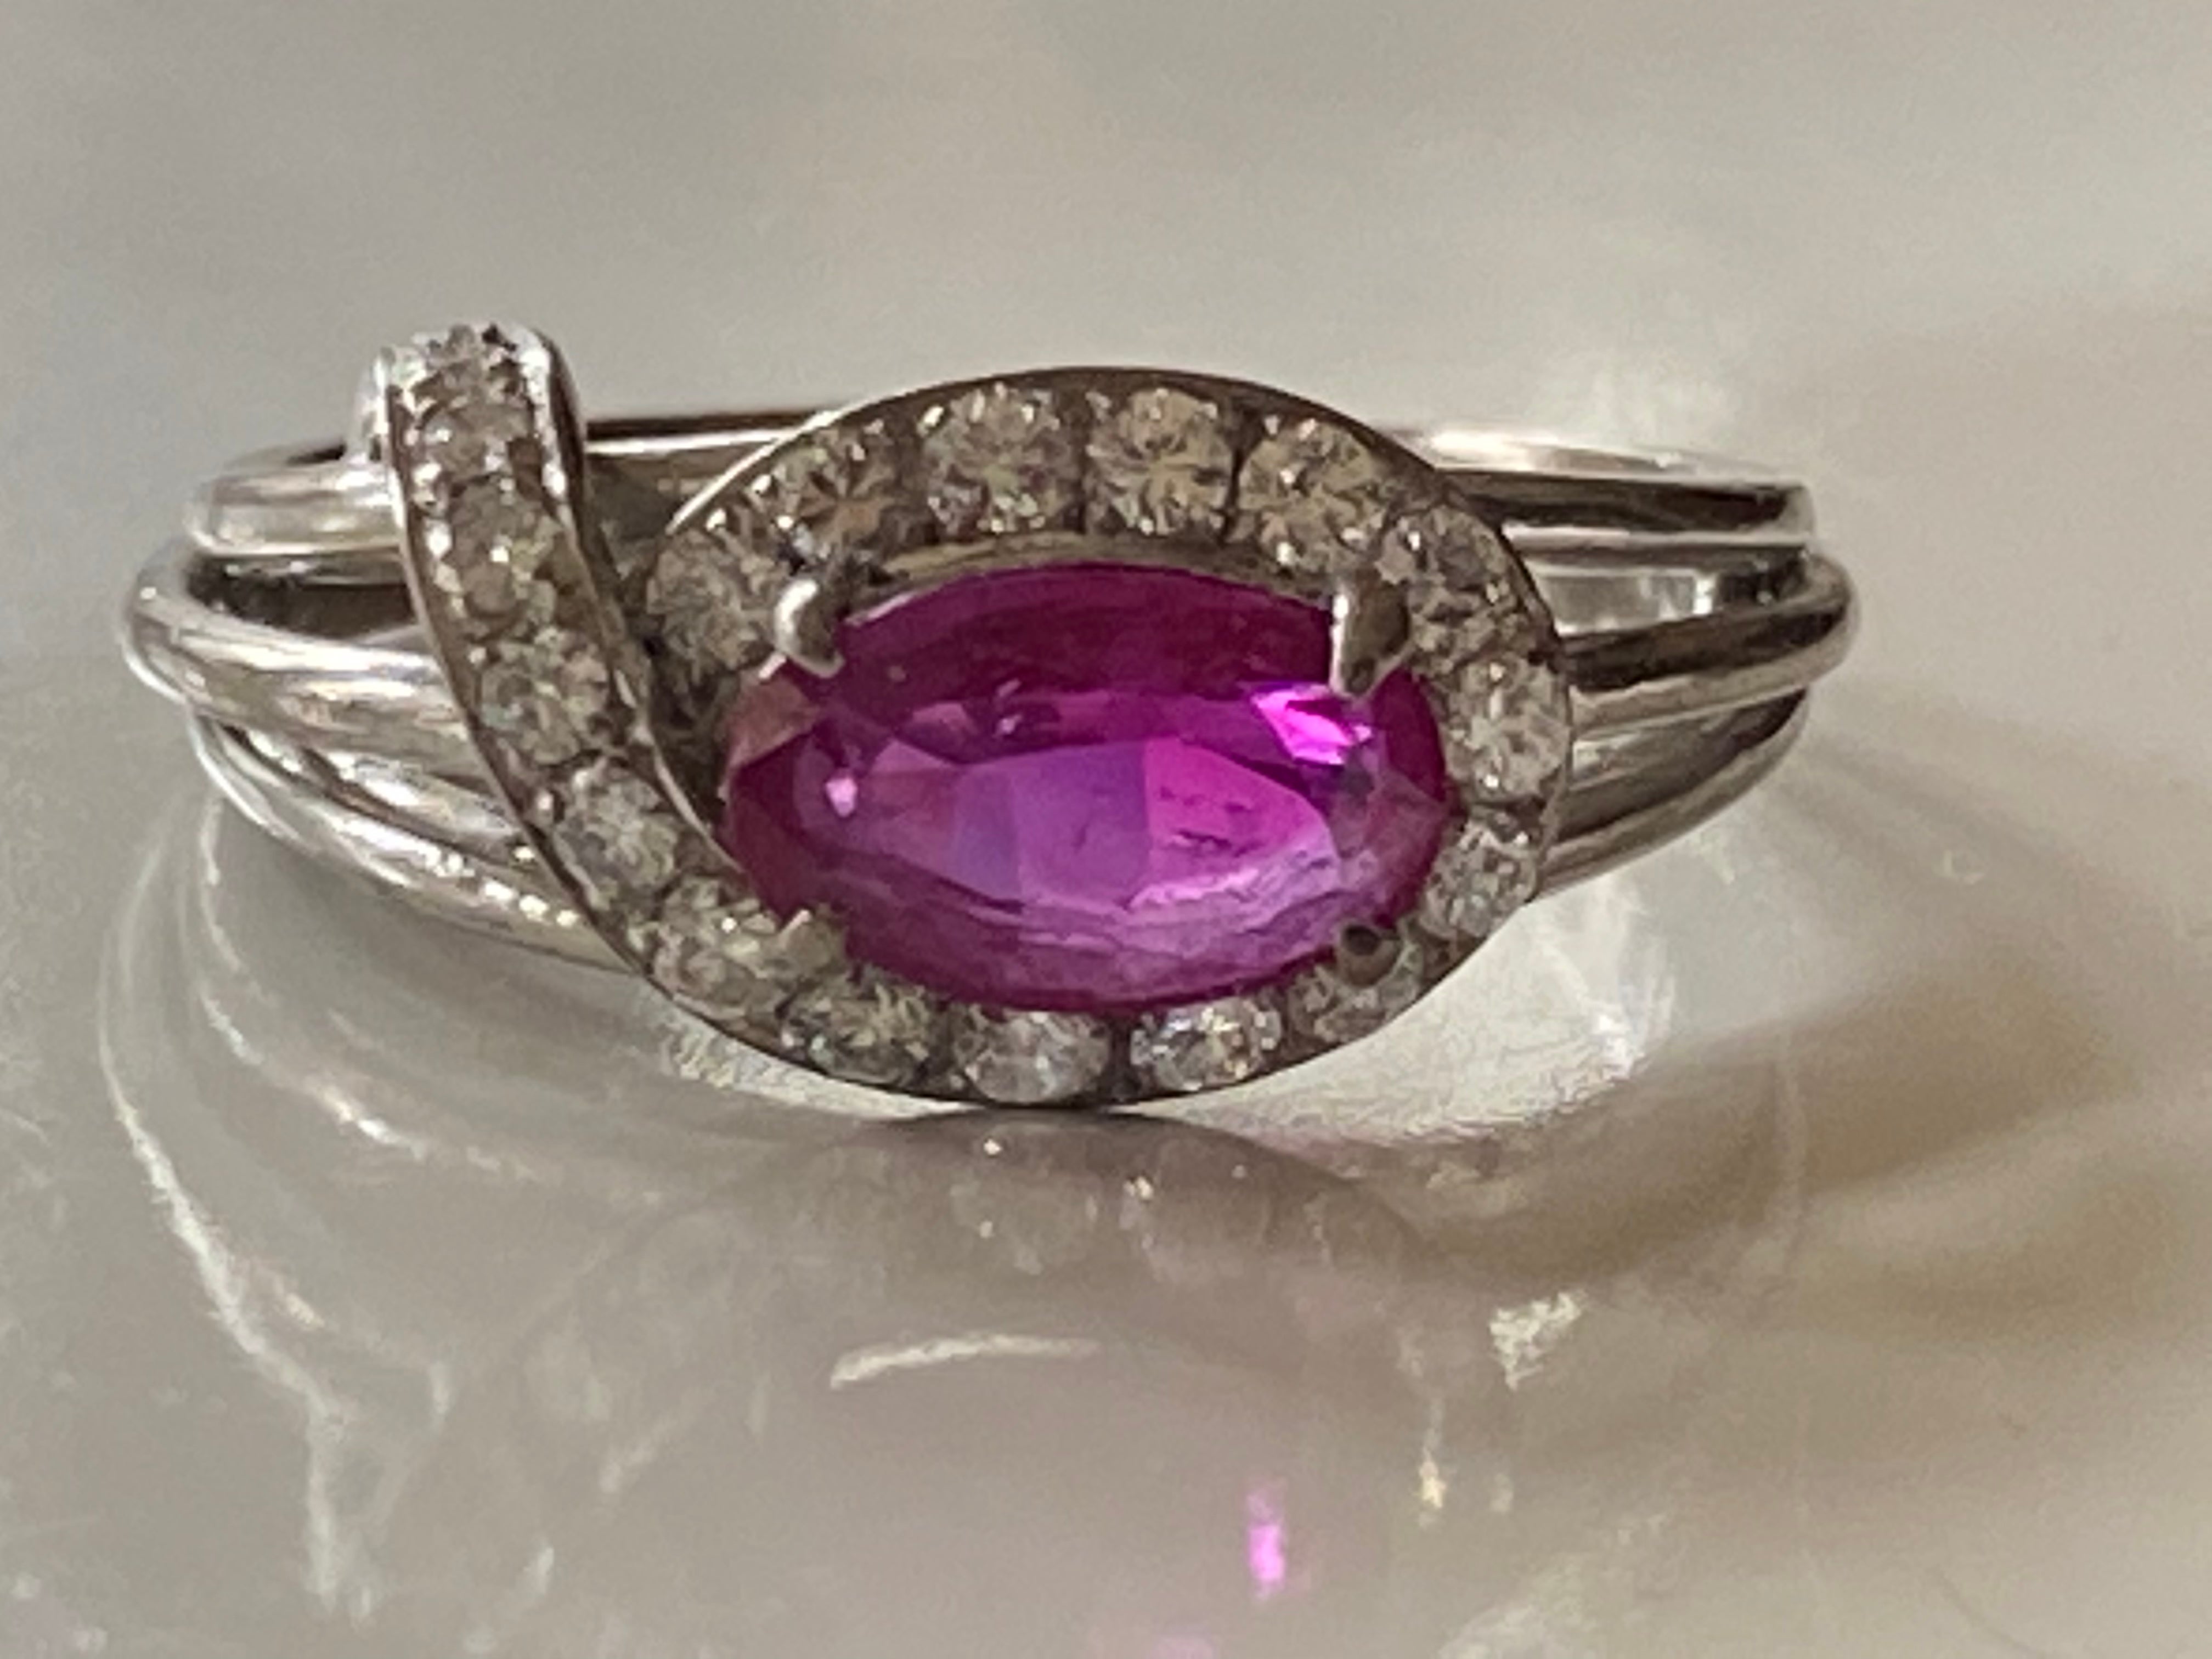 This distinctive ring crafted in the 1960s in platinum is designed around a natural unheated oval-shaped ruby measuring 5.45 x 9mm surrounded by a halo swirl adorned with eighteen gleaming round diamonds totaling approximately 0.50 carats and